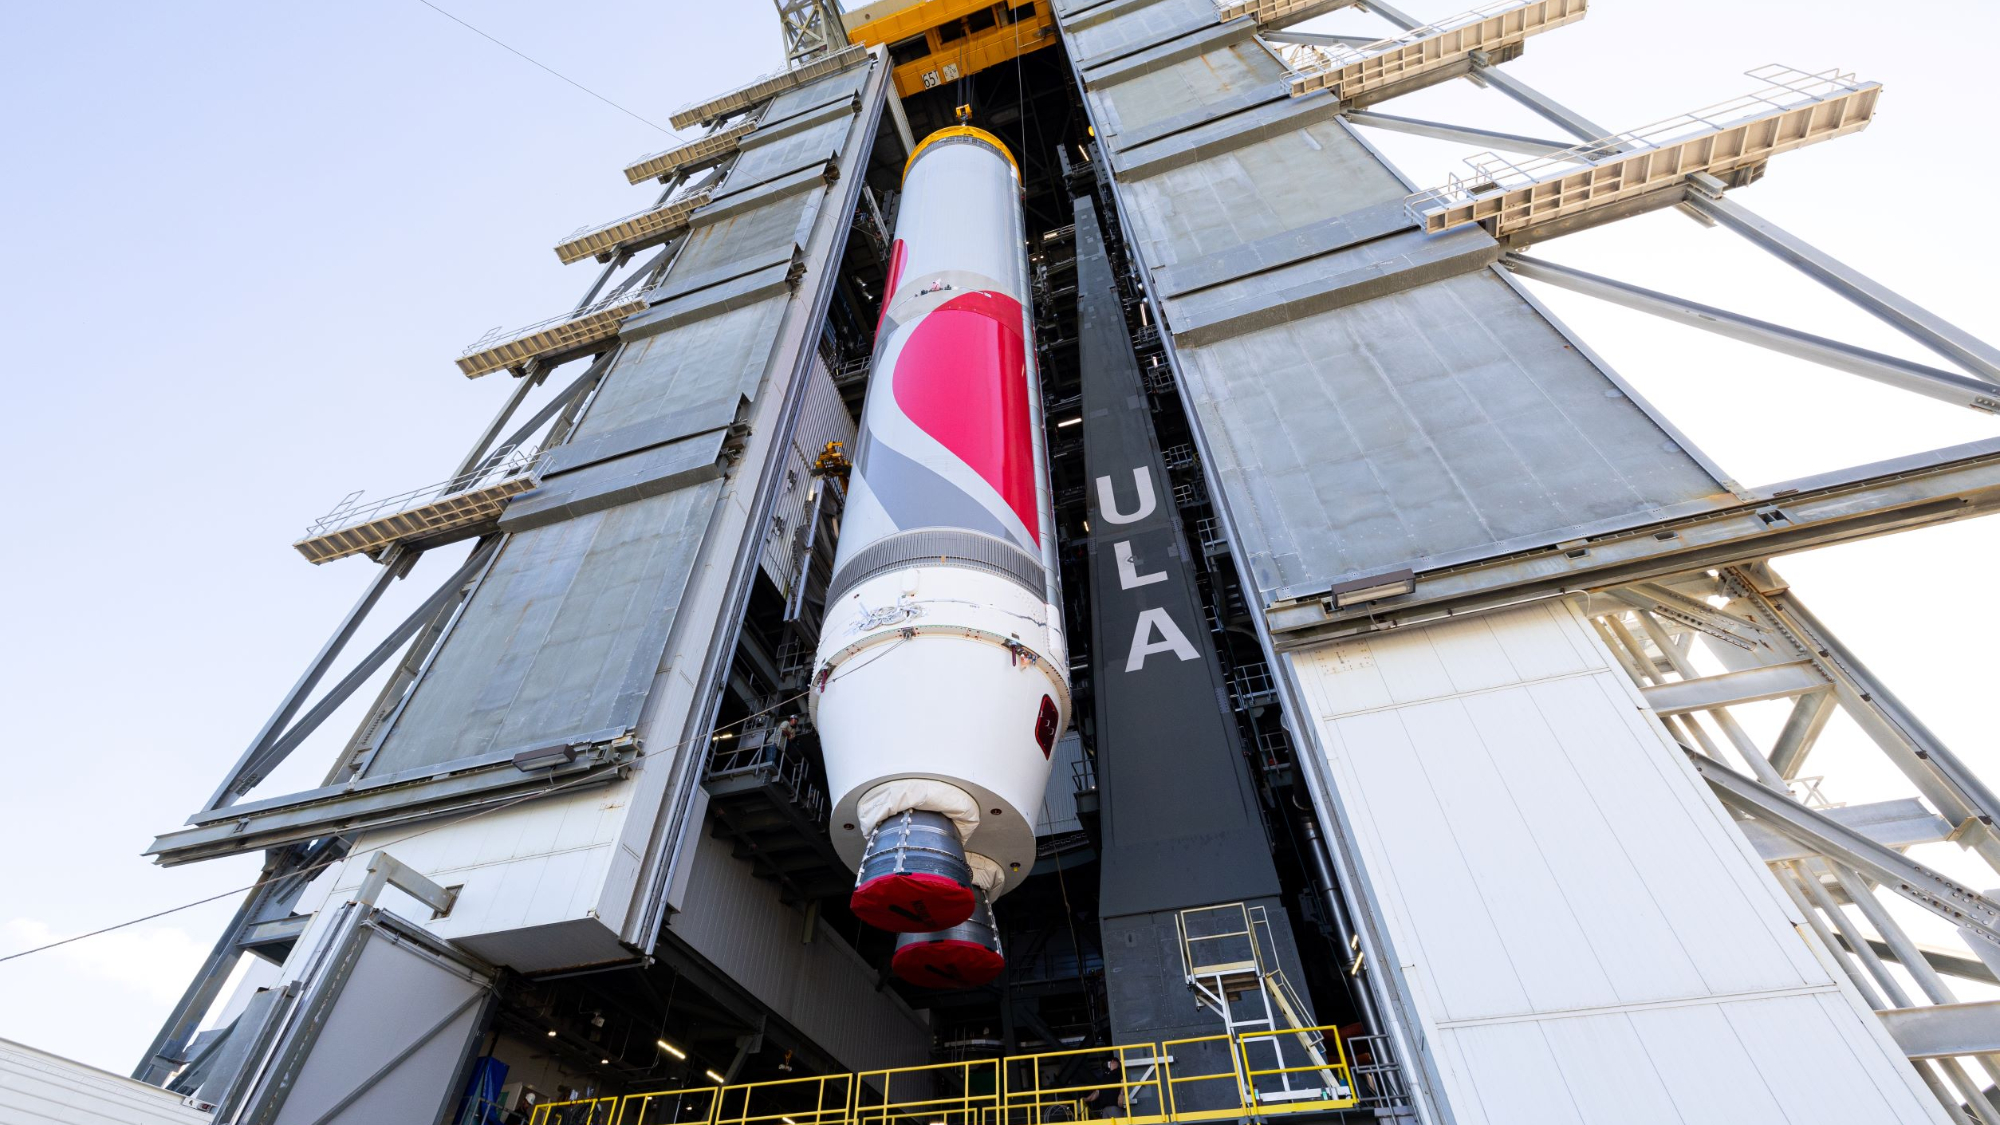 ULA Vulcan Centaur rocket’s 1st launch delayed to January 2024 Space